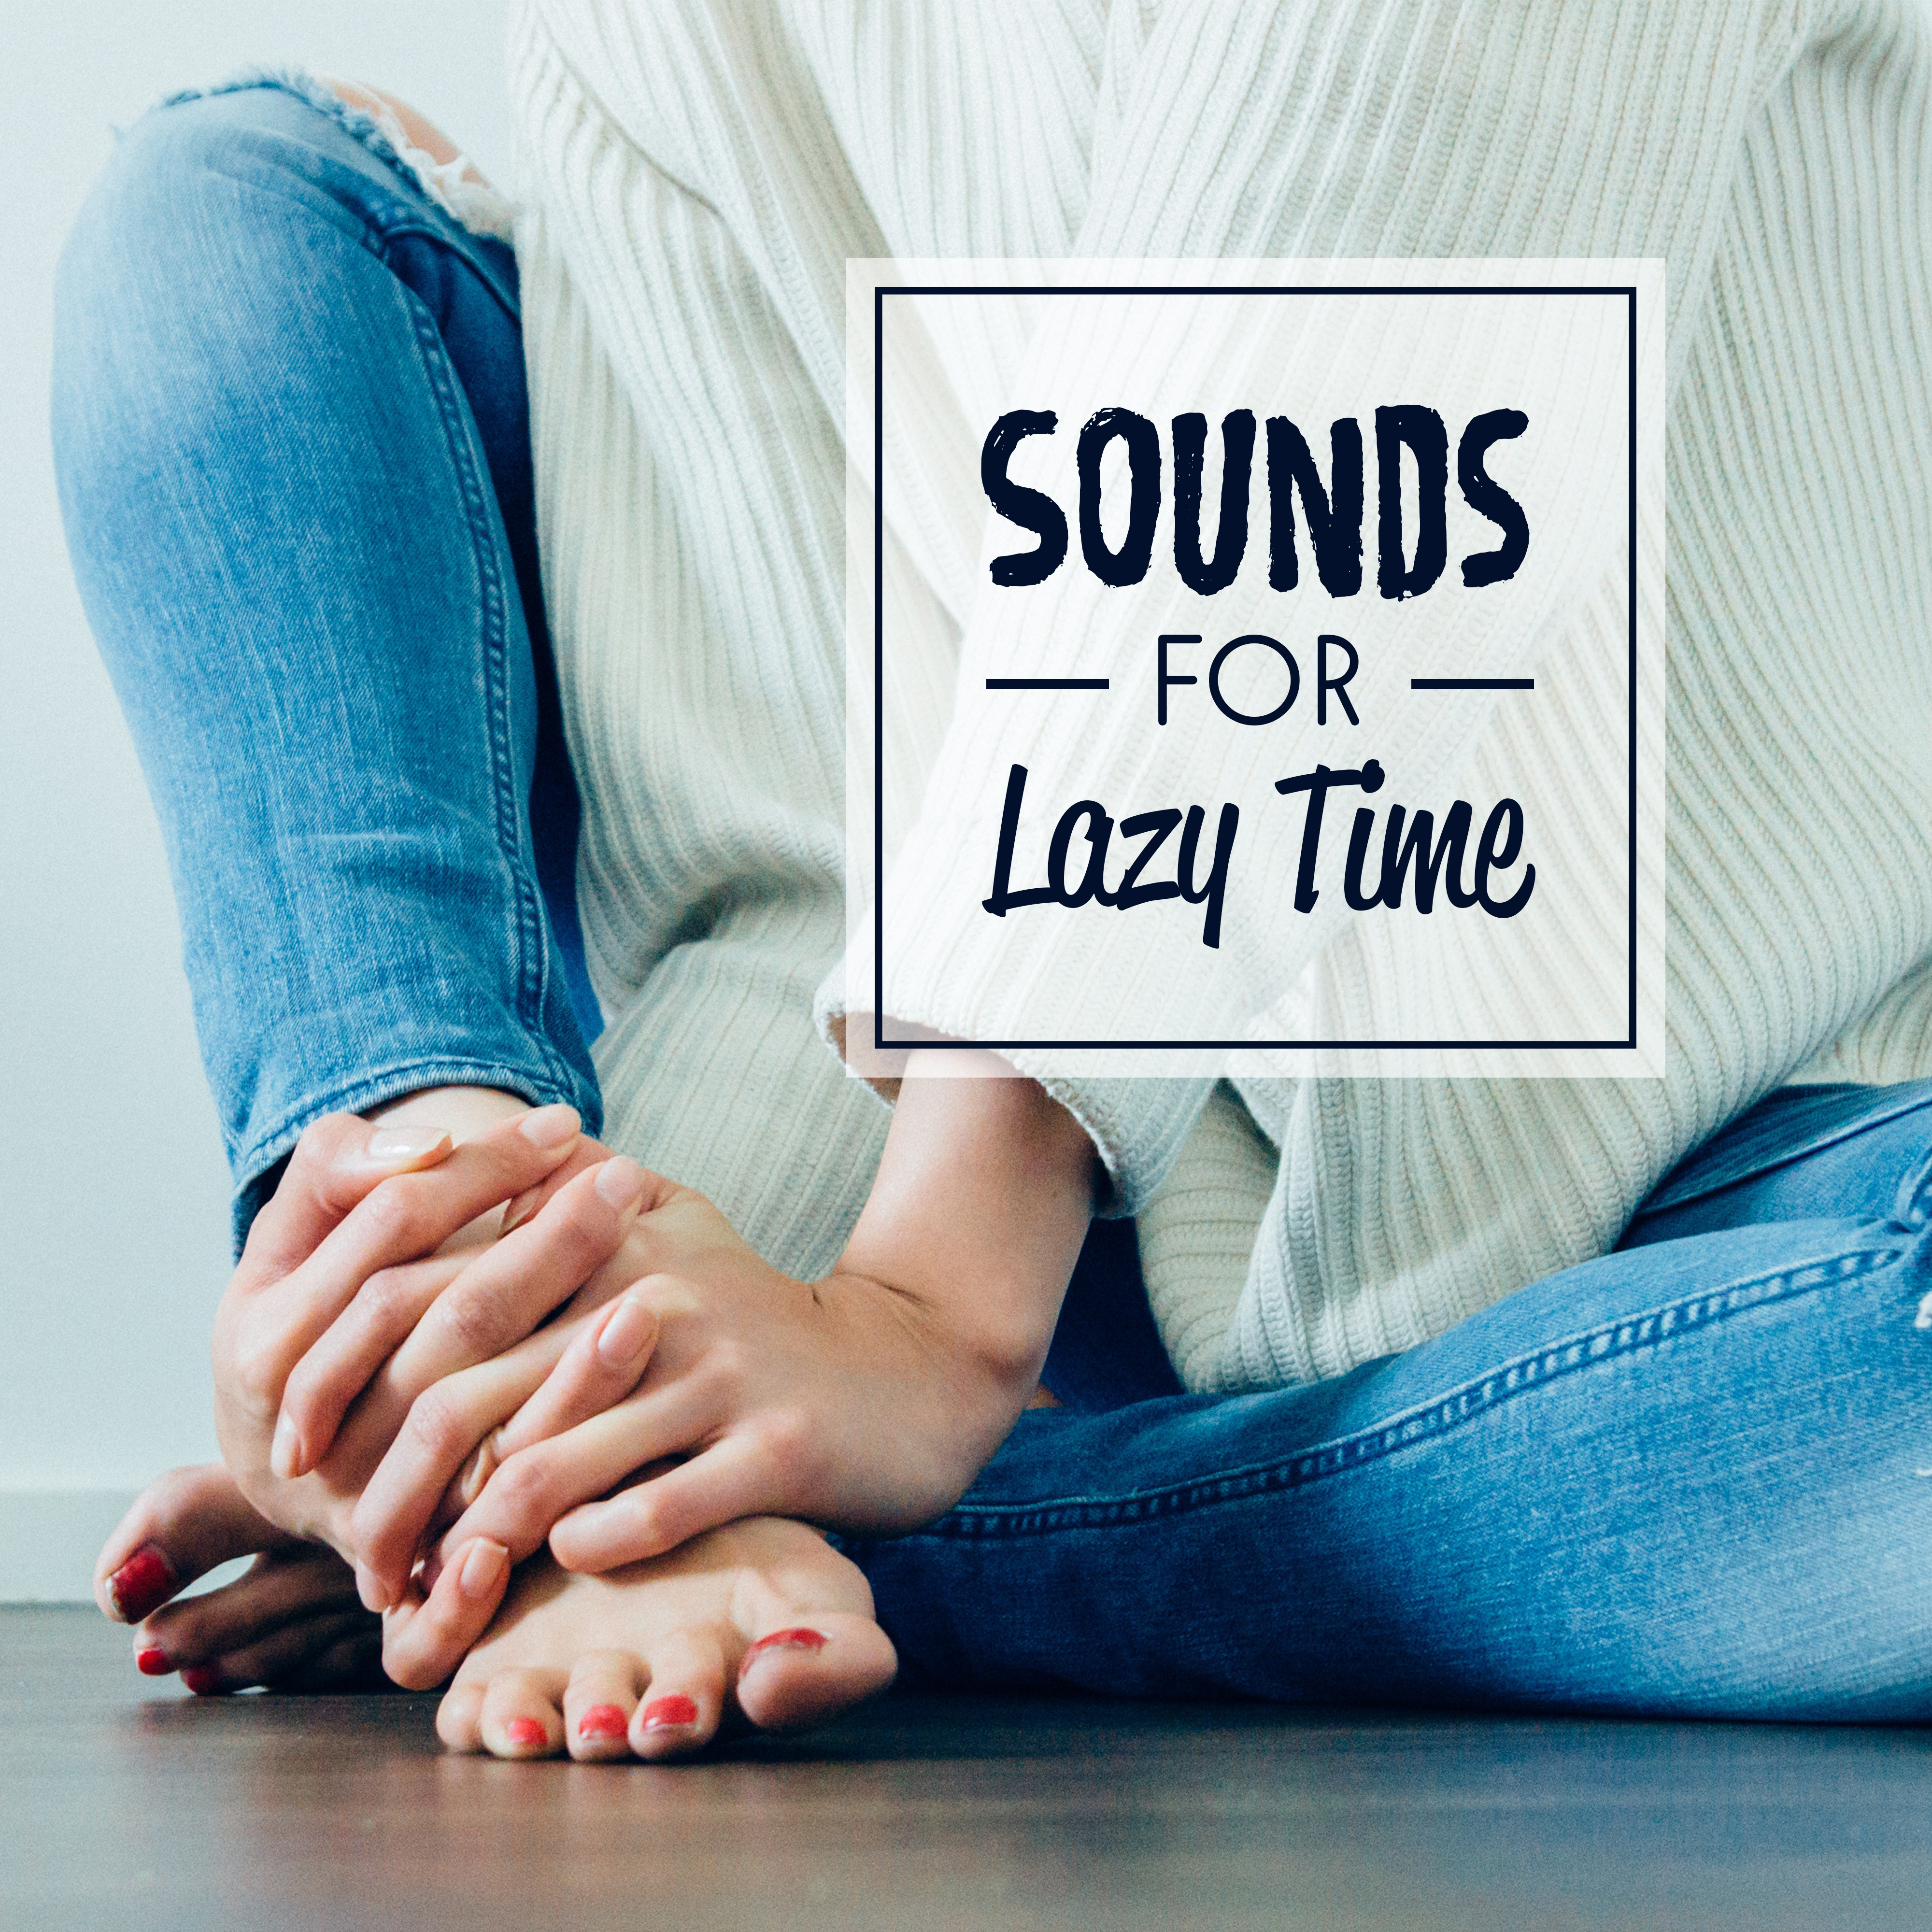 Sounds for Lazy Time